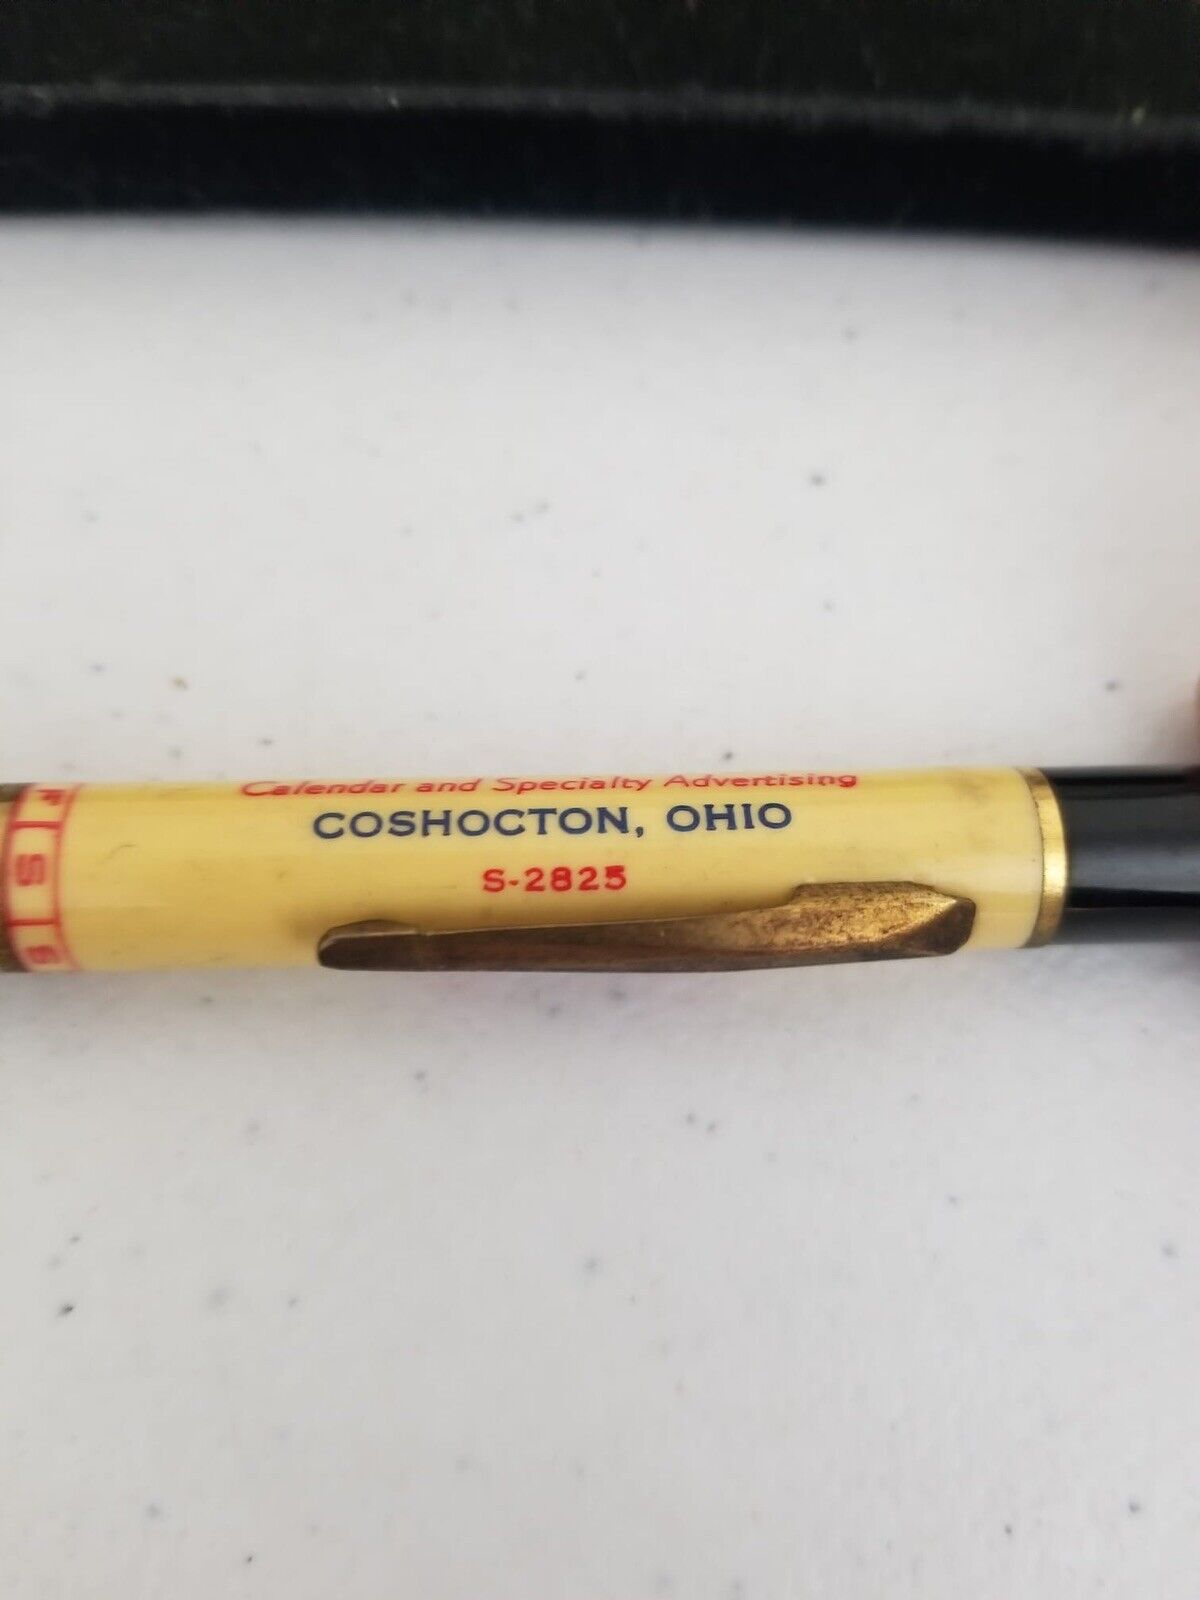 Vintage 7Up Promotional Mechanical Pencil by Sheaffer - Rare Collectible Advertising Memorabilia - TreasuTiques